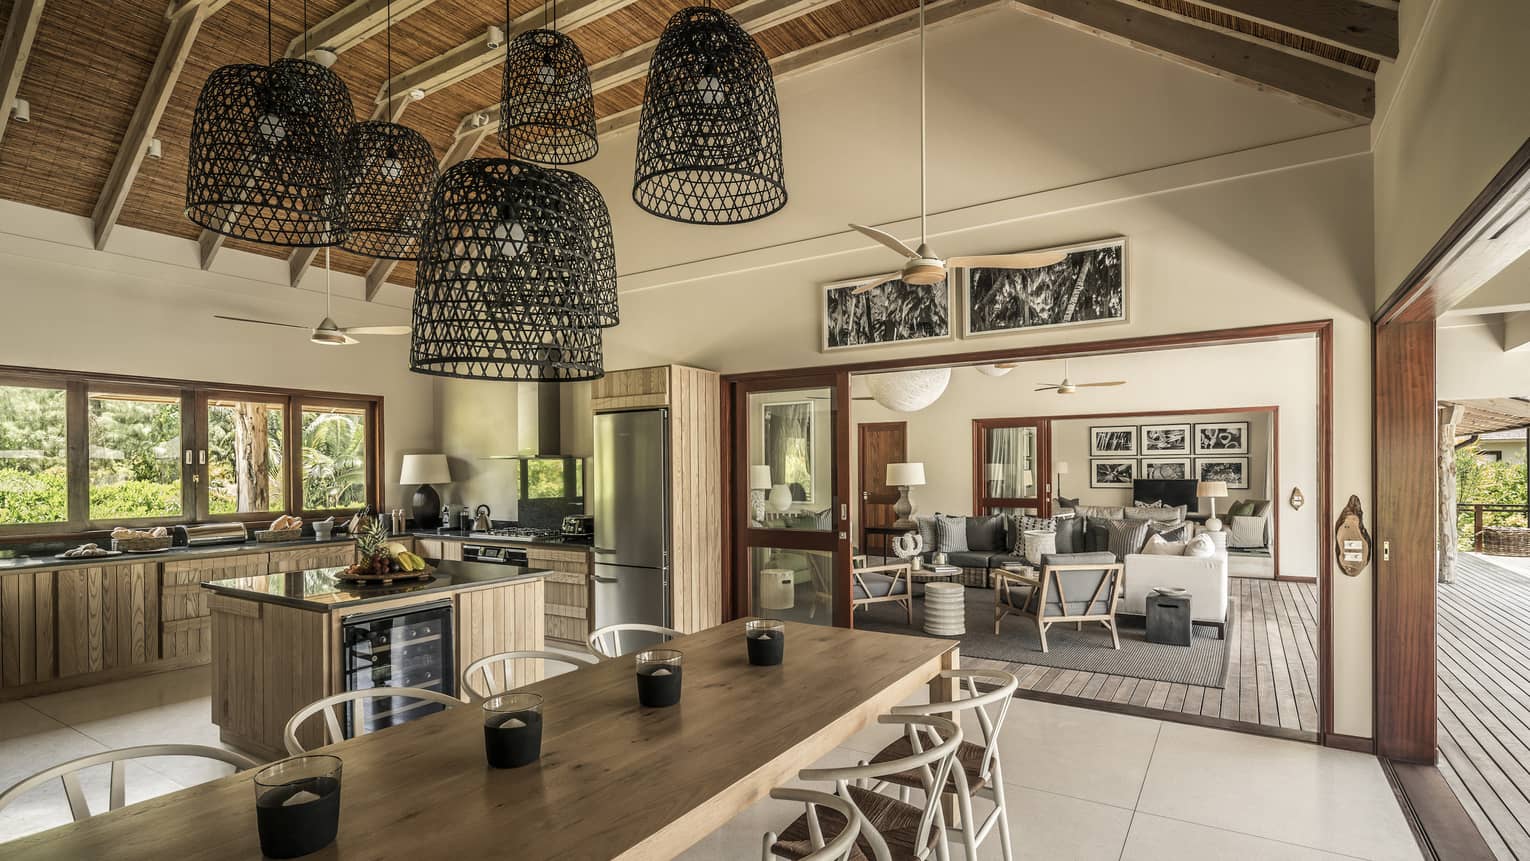 Large basket-like chandeliers hang from gambrel roof over long wood dining table, large kitchen